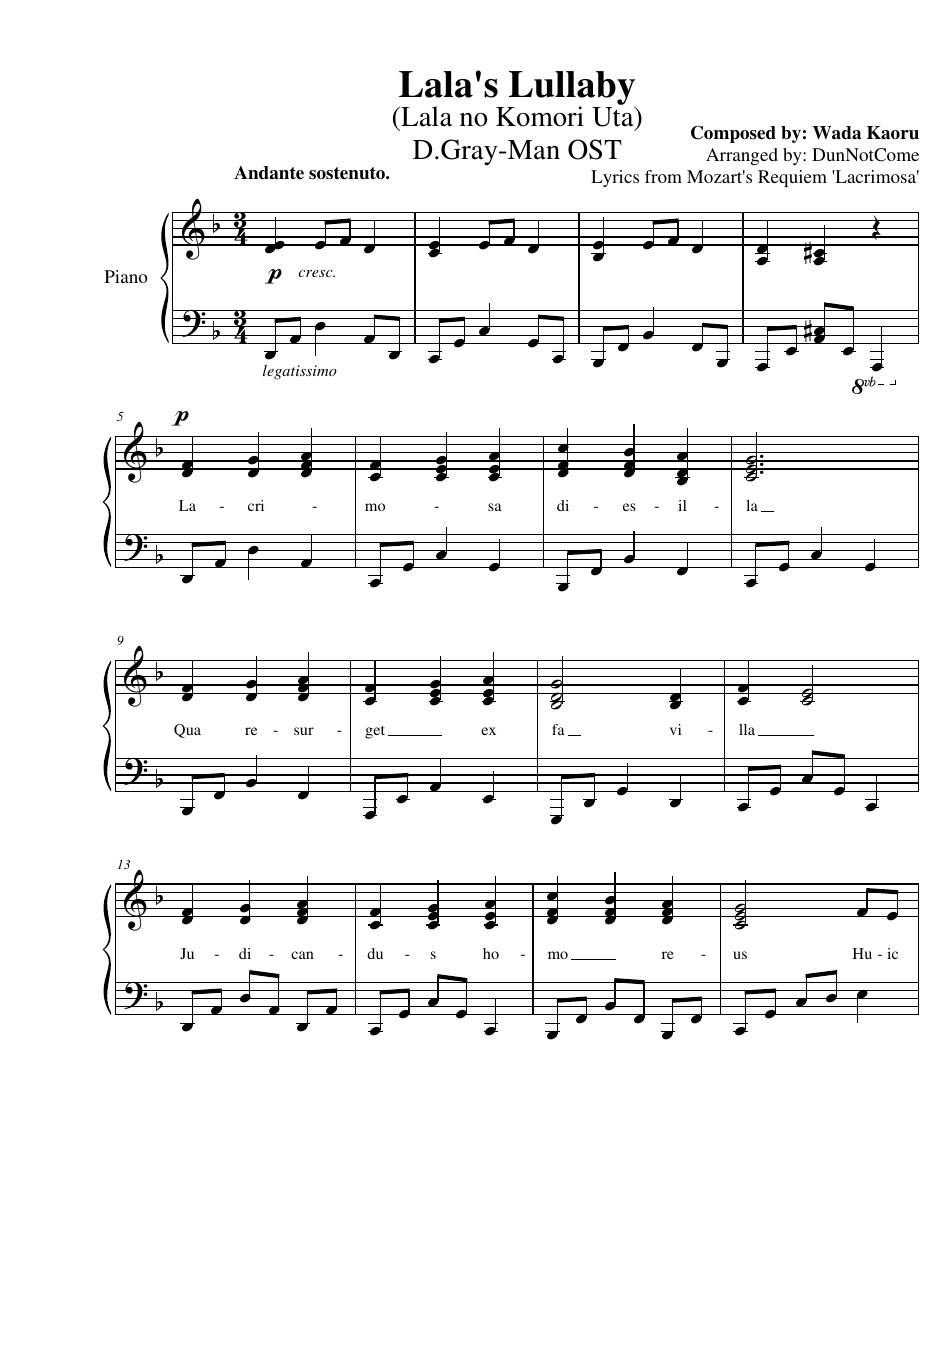 D.Gray-Man OST - Lala's Lullaby Piano Sheet Music preview